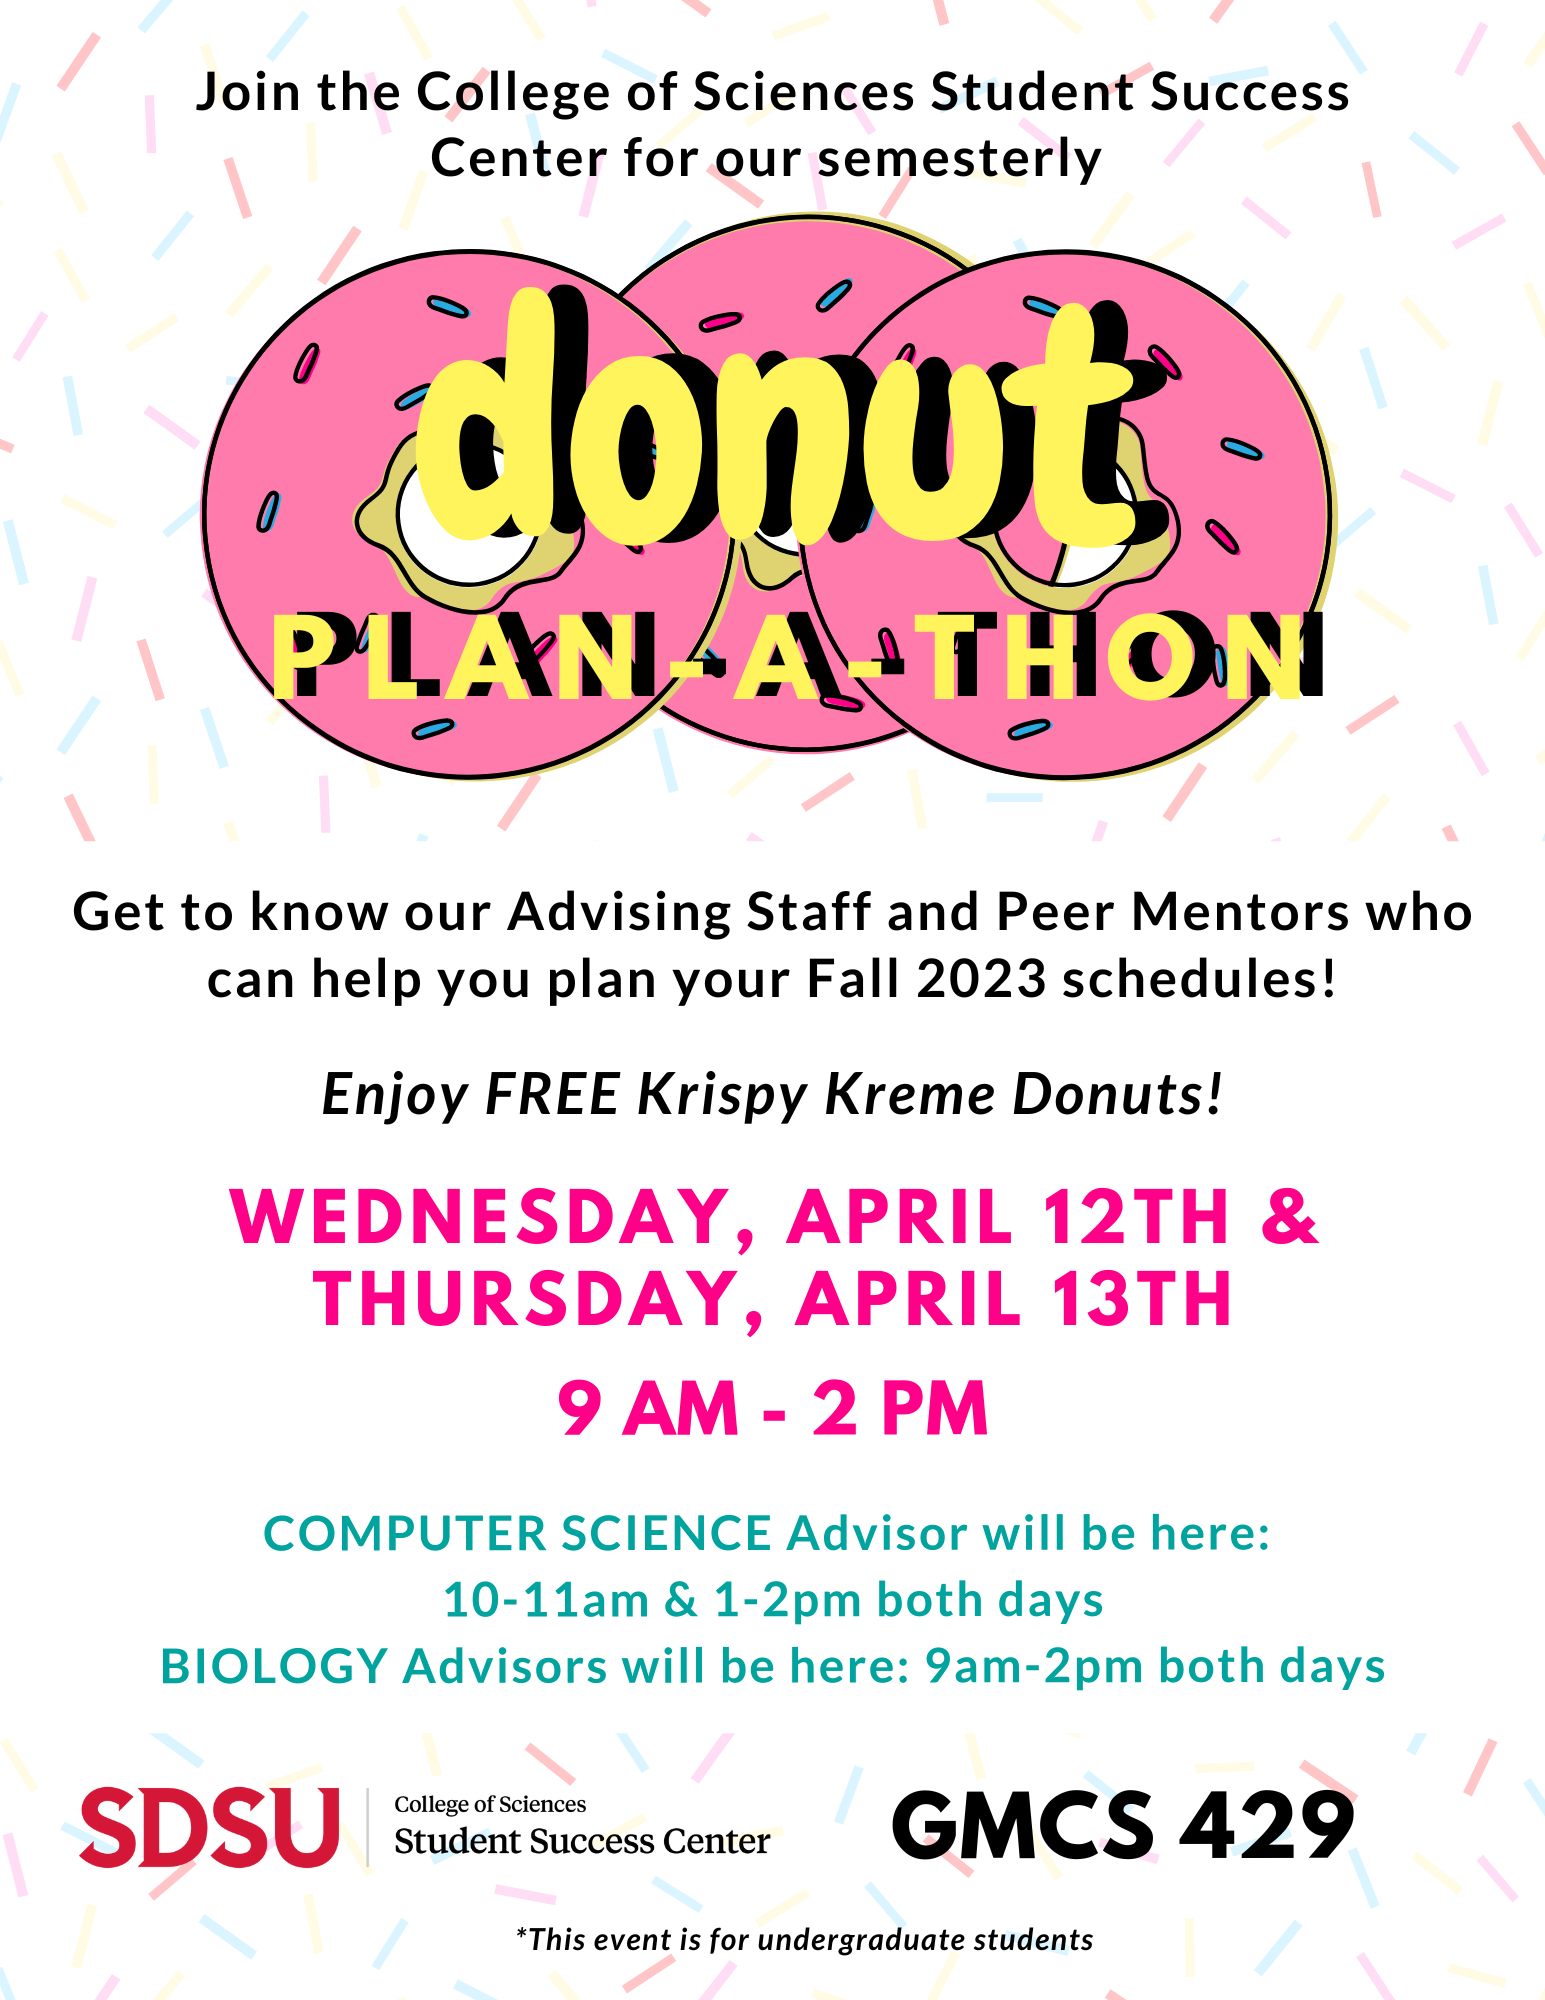 donut planathon spring 23 flyer with 3 pink donuts at the top